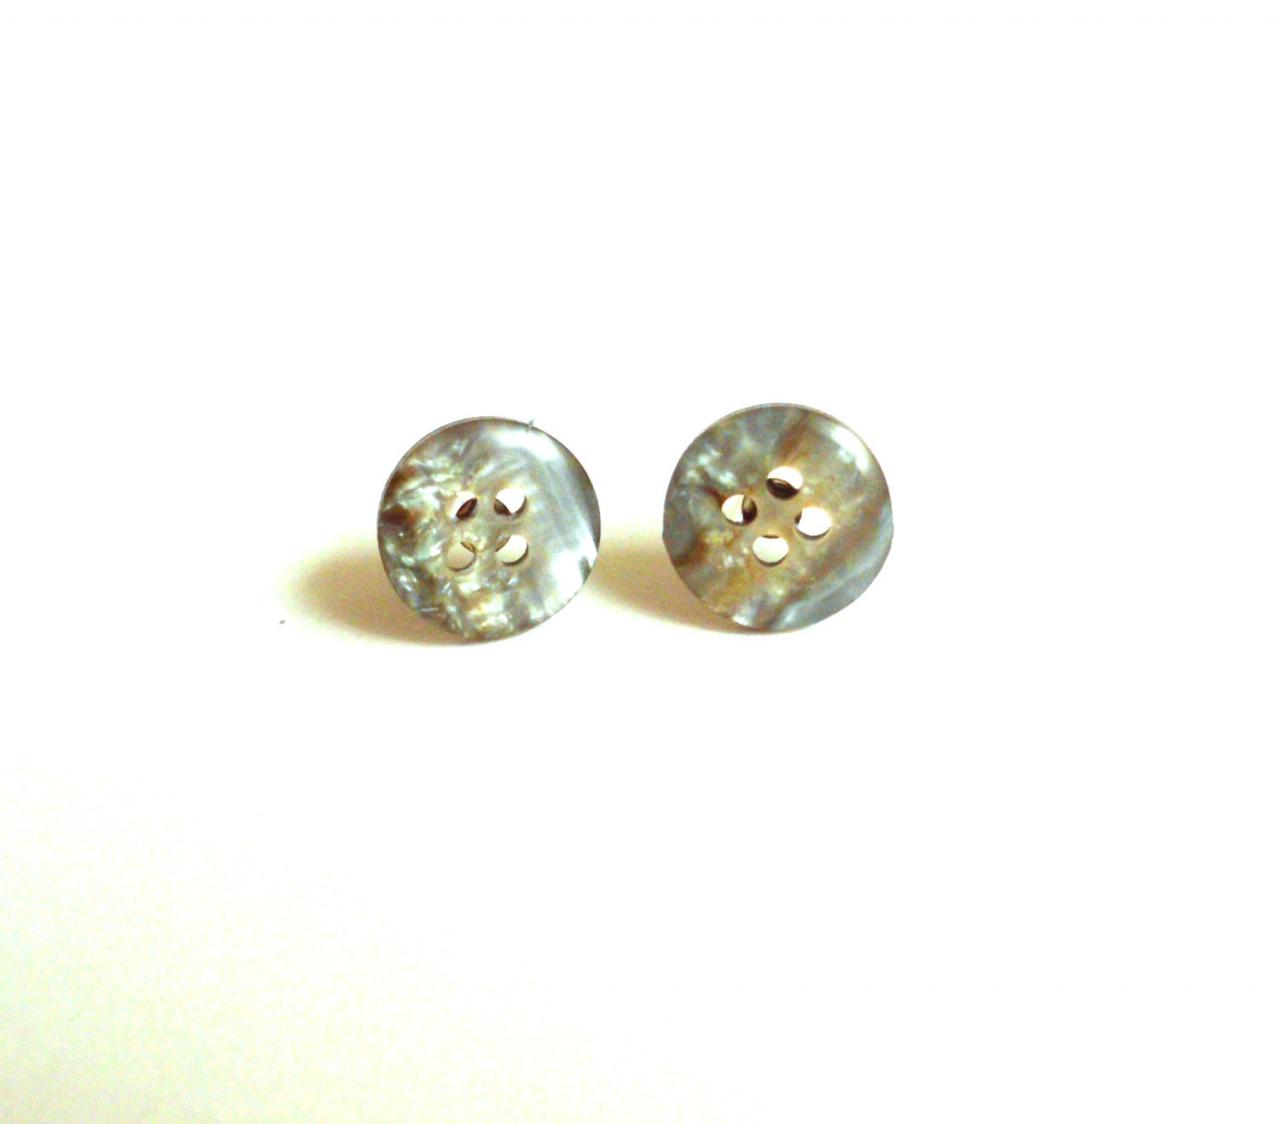 Eco-friendly Recycled Buttons Post Earrings, Upcycled Jewelry, Studs Earrings Made Of Repurposed Iridescent Buttons